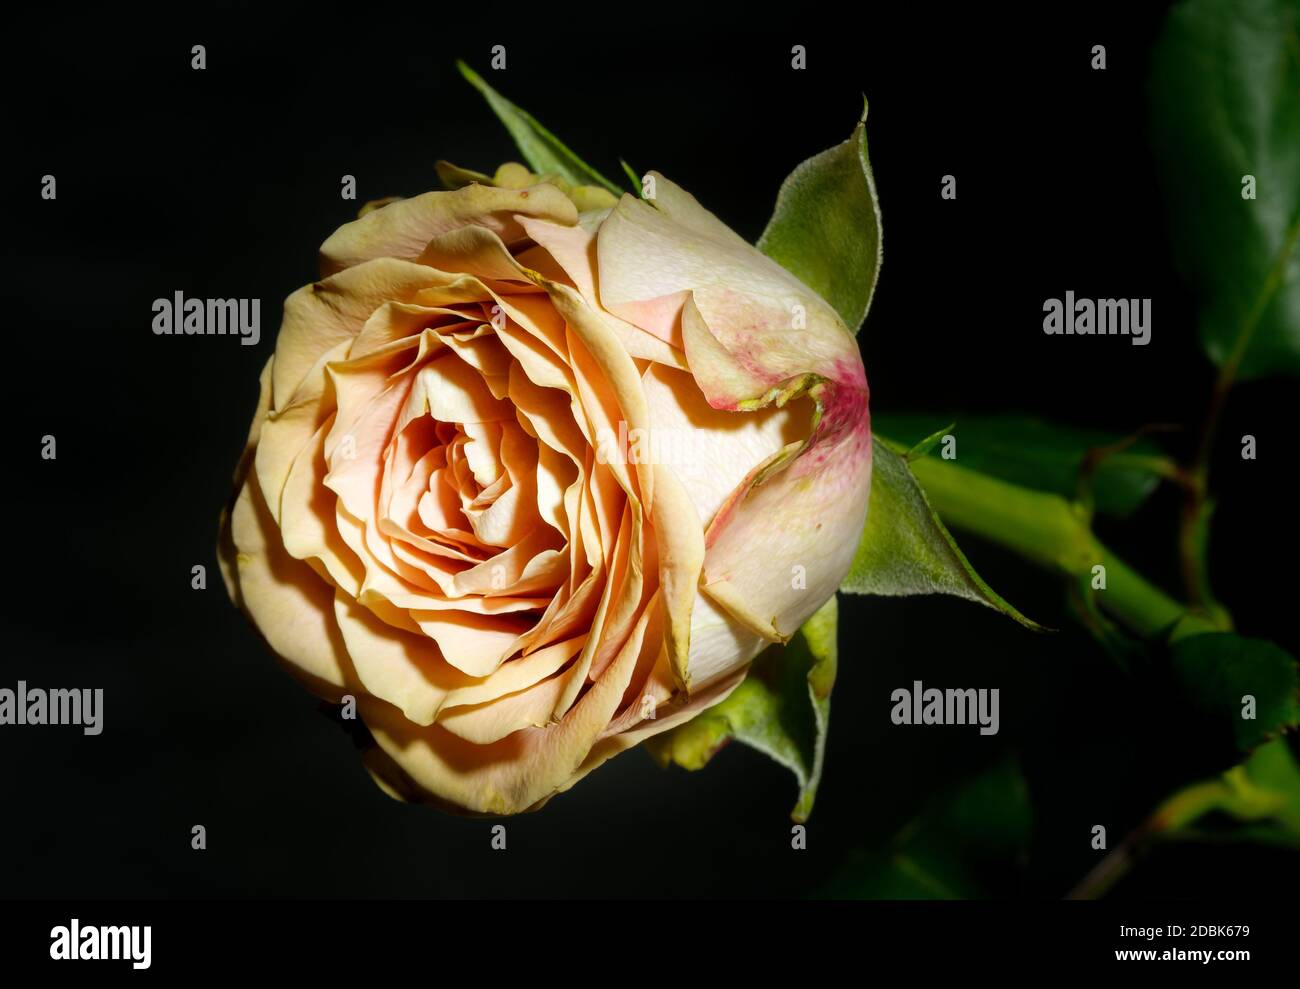 Colourful rose, on a dark background. Photographed from a close distance, in full bloom. Stock Photo